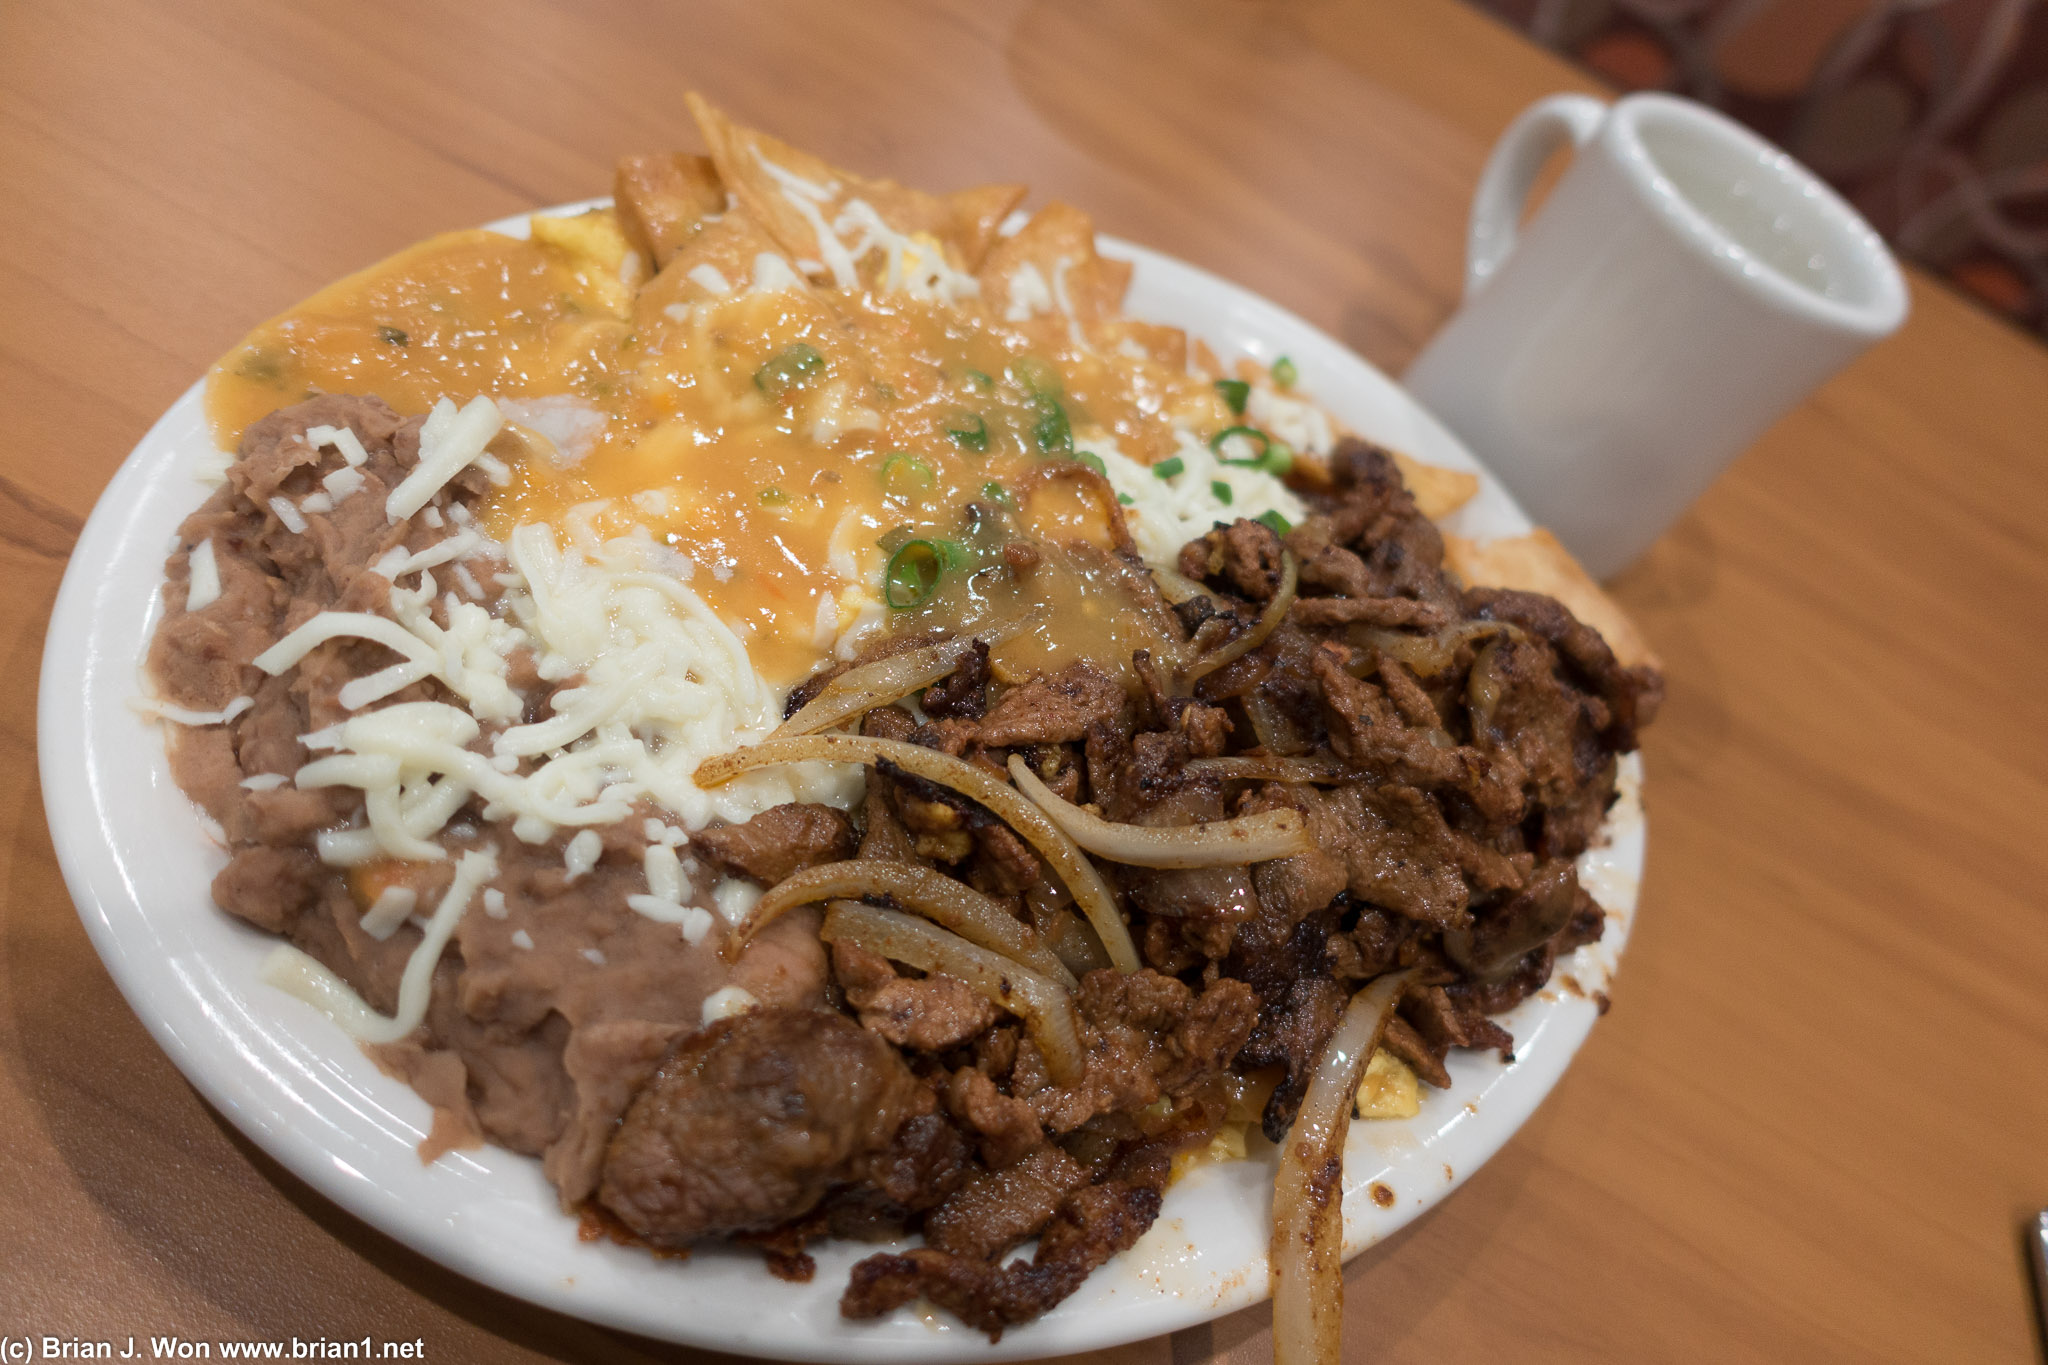 Chilaquiles complete with carne asada, beans, and egg. Definitely heavy.